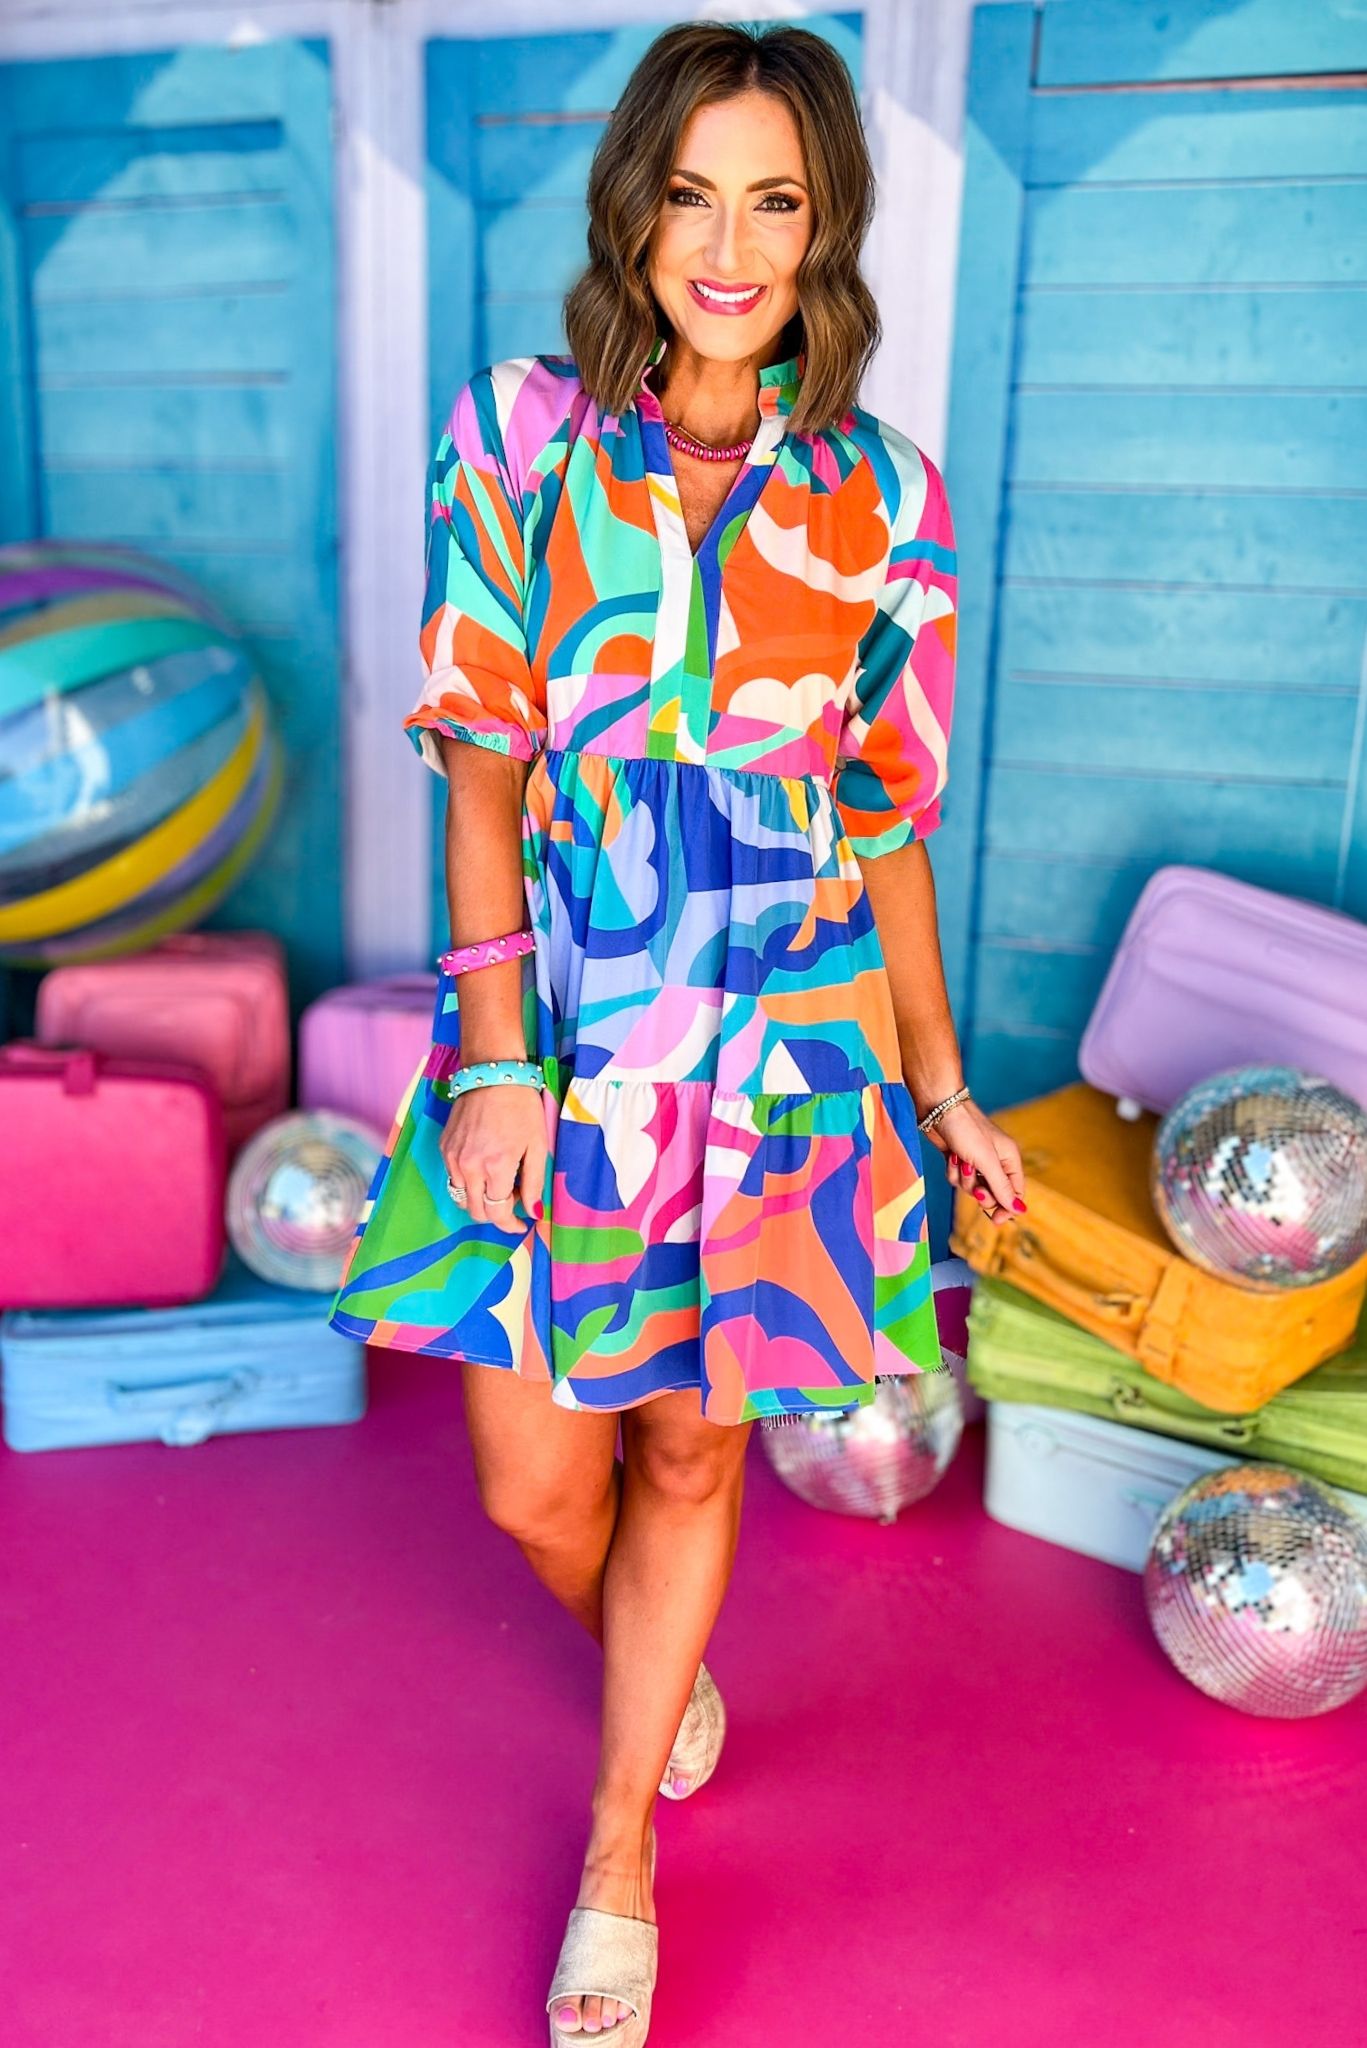 SSYS The Mix Print Tatum Dress In Multi, ssys the label, spring break dress, spring break style, spring fashion affordable fashion, elevated style, bright style, printed dress, mom style, shop style your senses by mallory fitzsimmons, ssys by mallory fitzsimmons